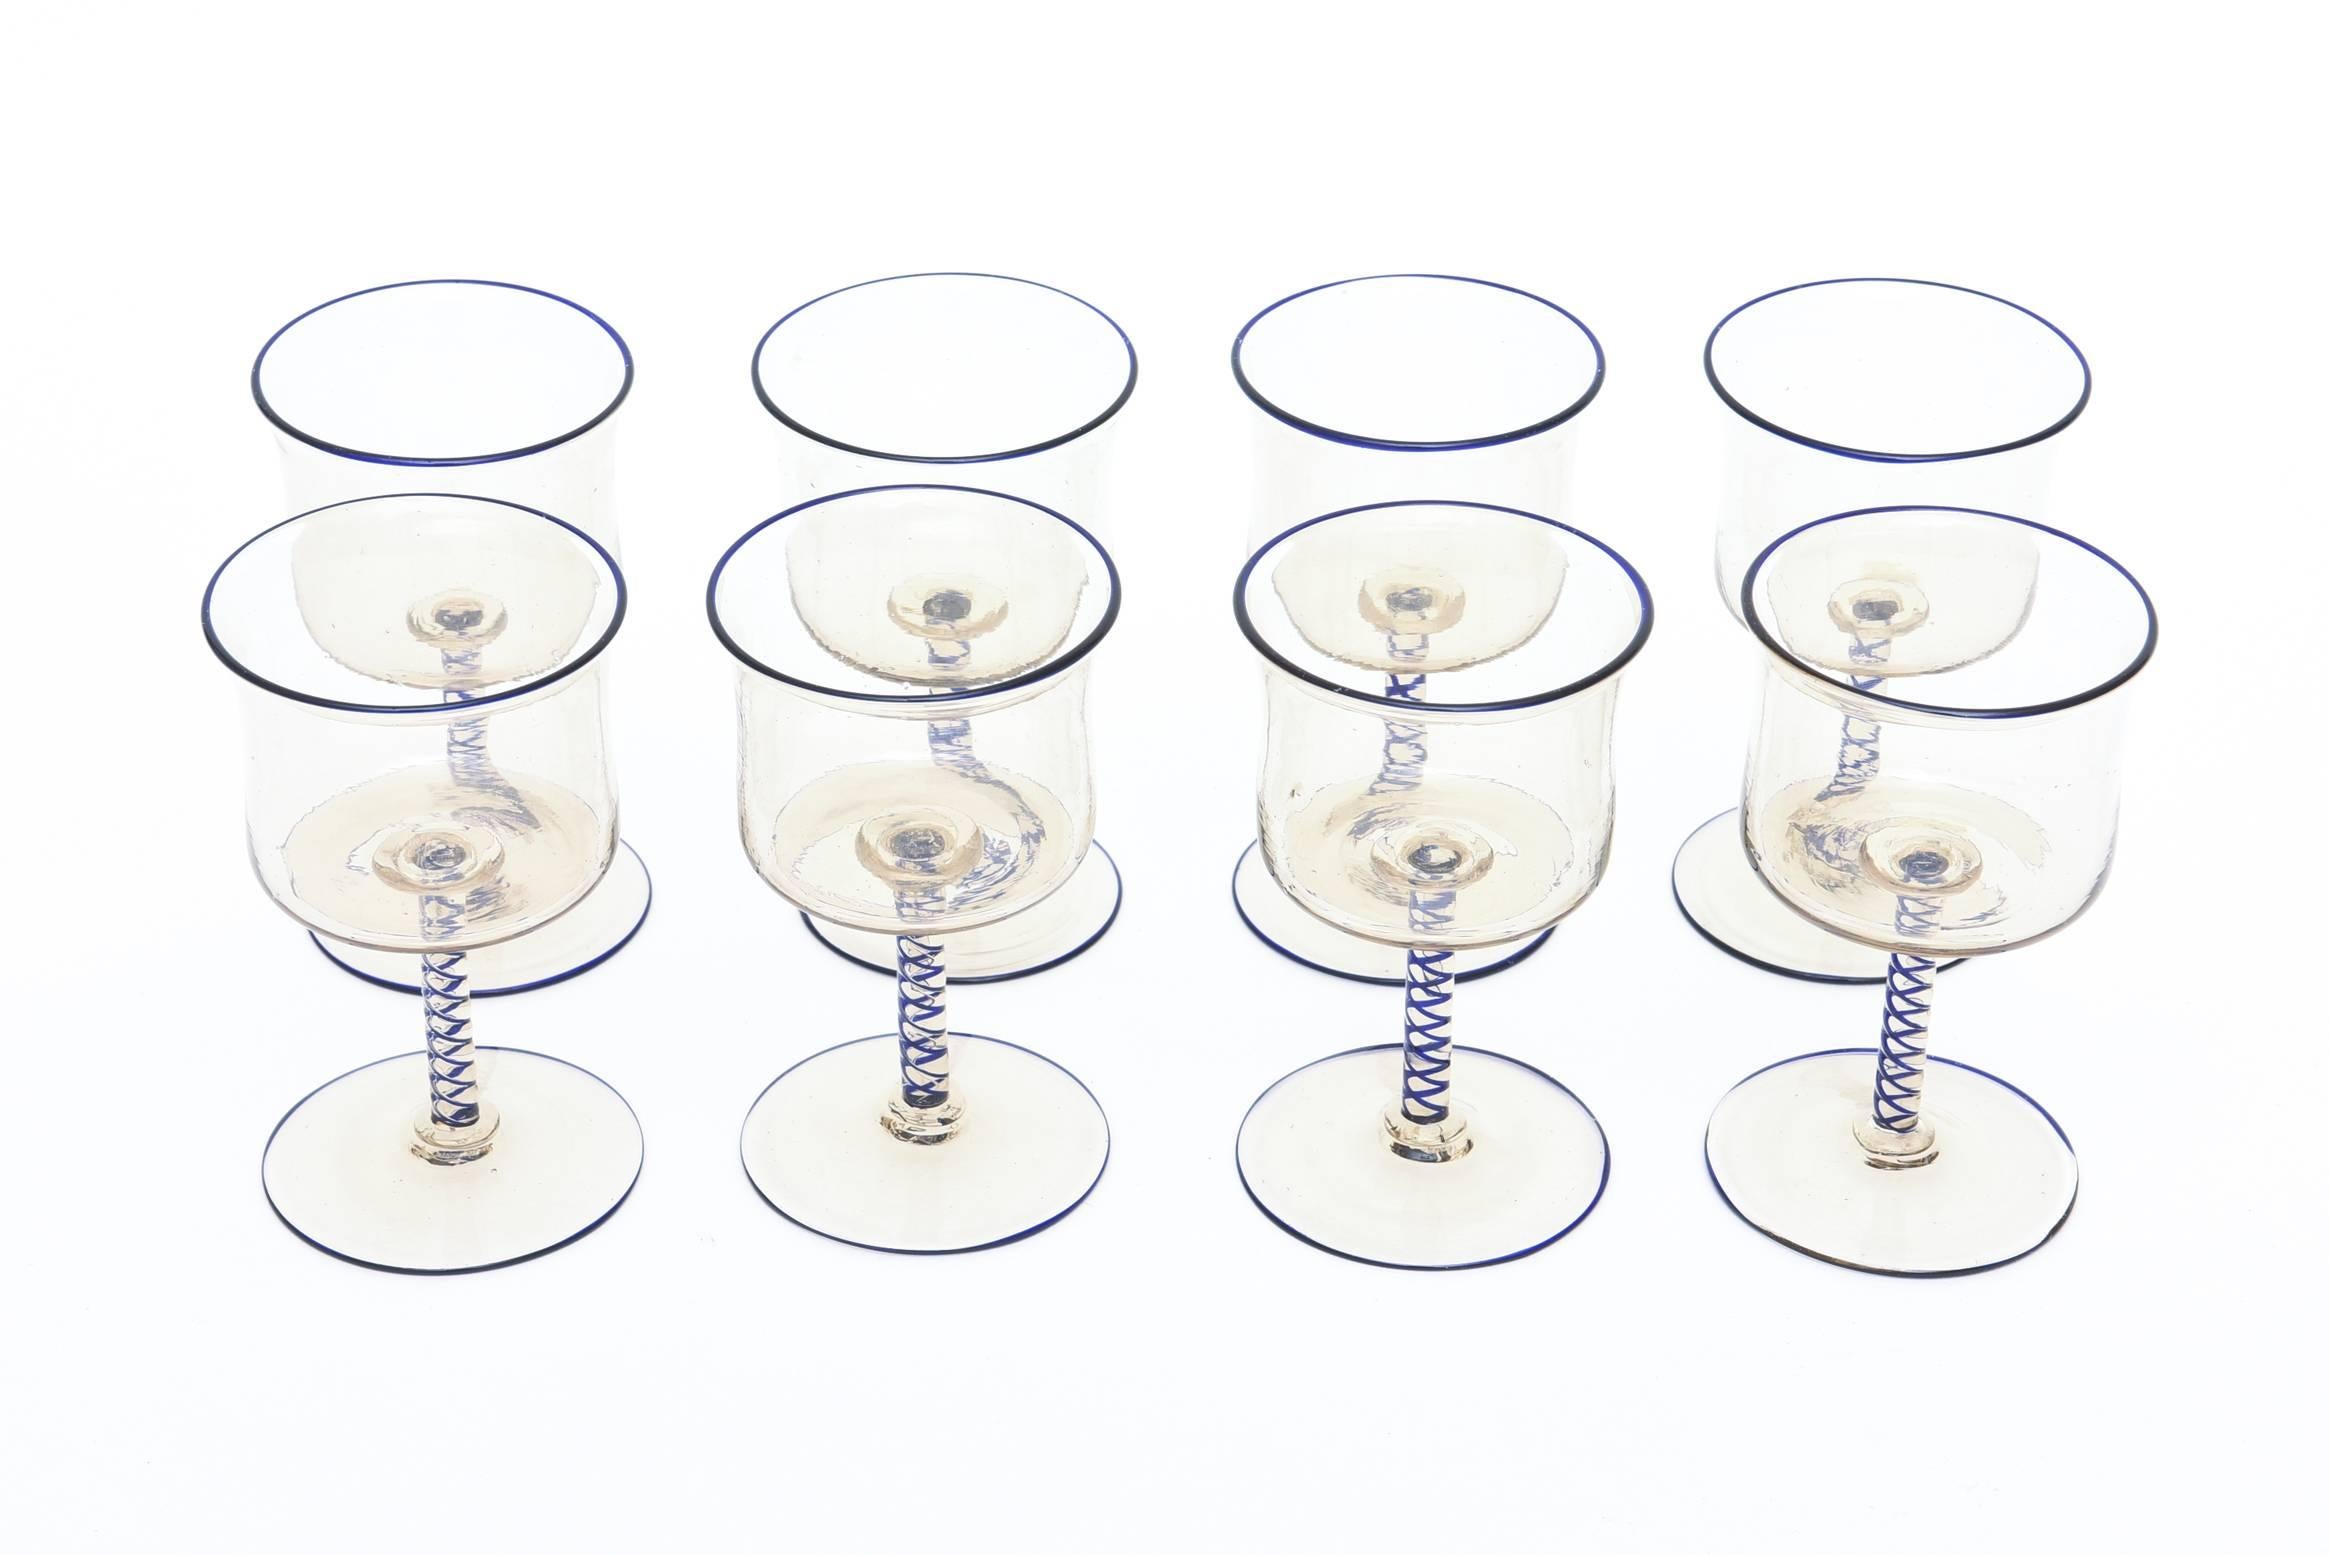 These beautiful vintage Italian cordial glasses are exquisite in person. Great barware! They have a beautiful delicate nature in form. They need to be appreciated in person.
They have navy blue criss cross Latticino stems and blue rims dusted with